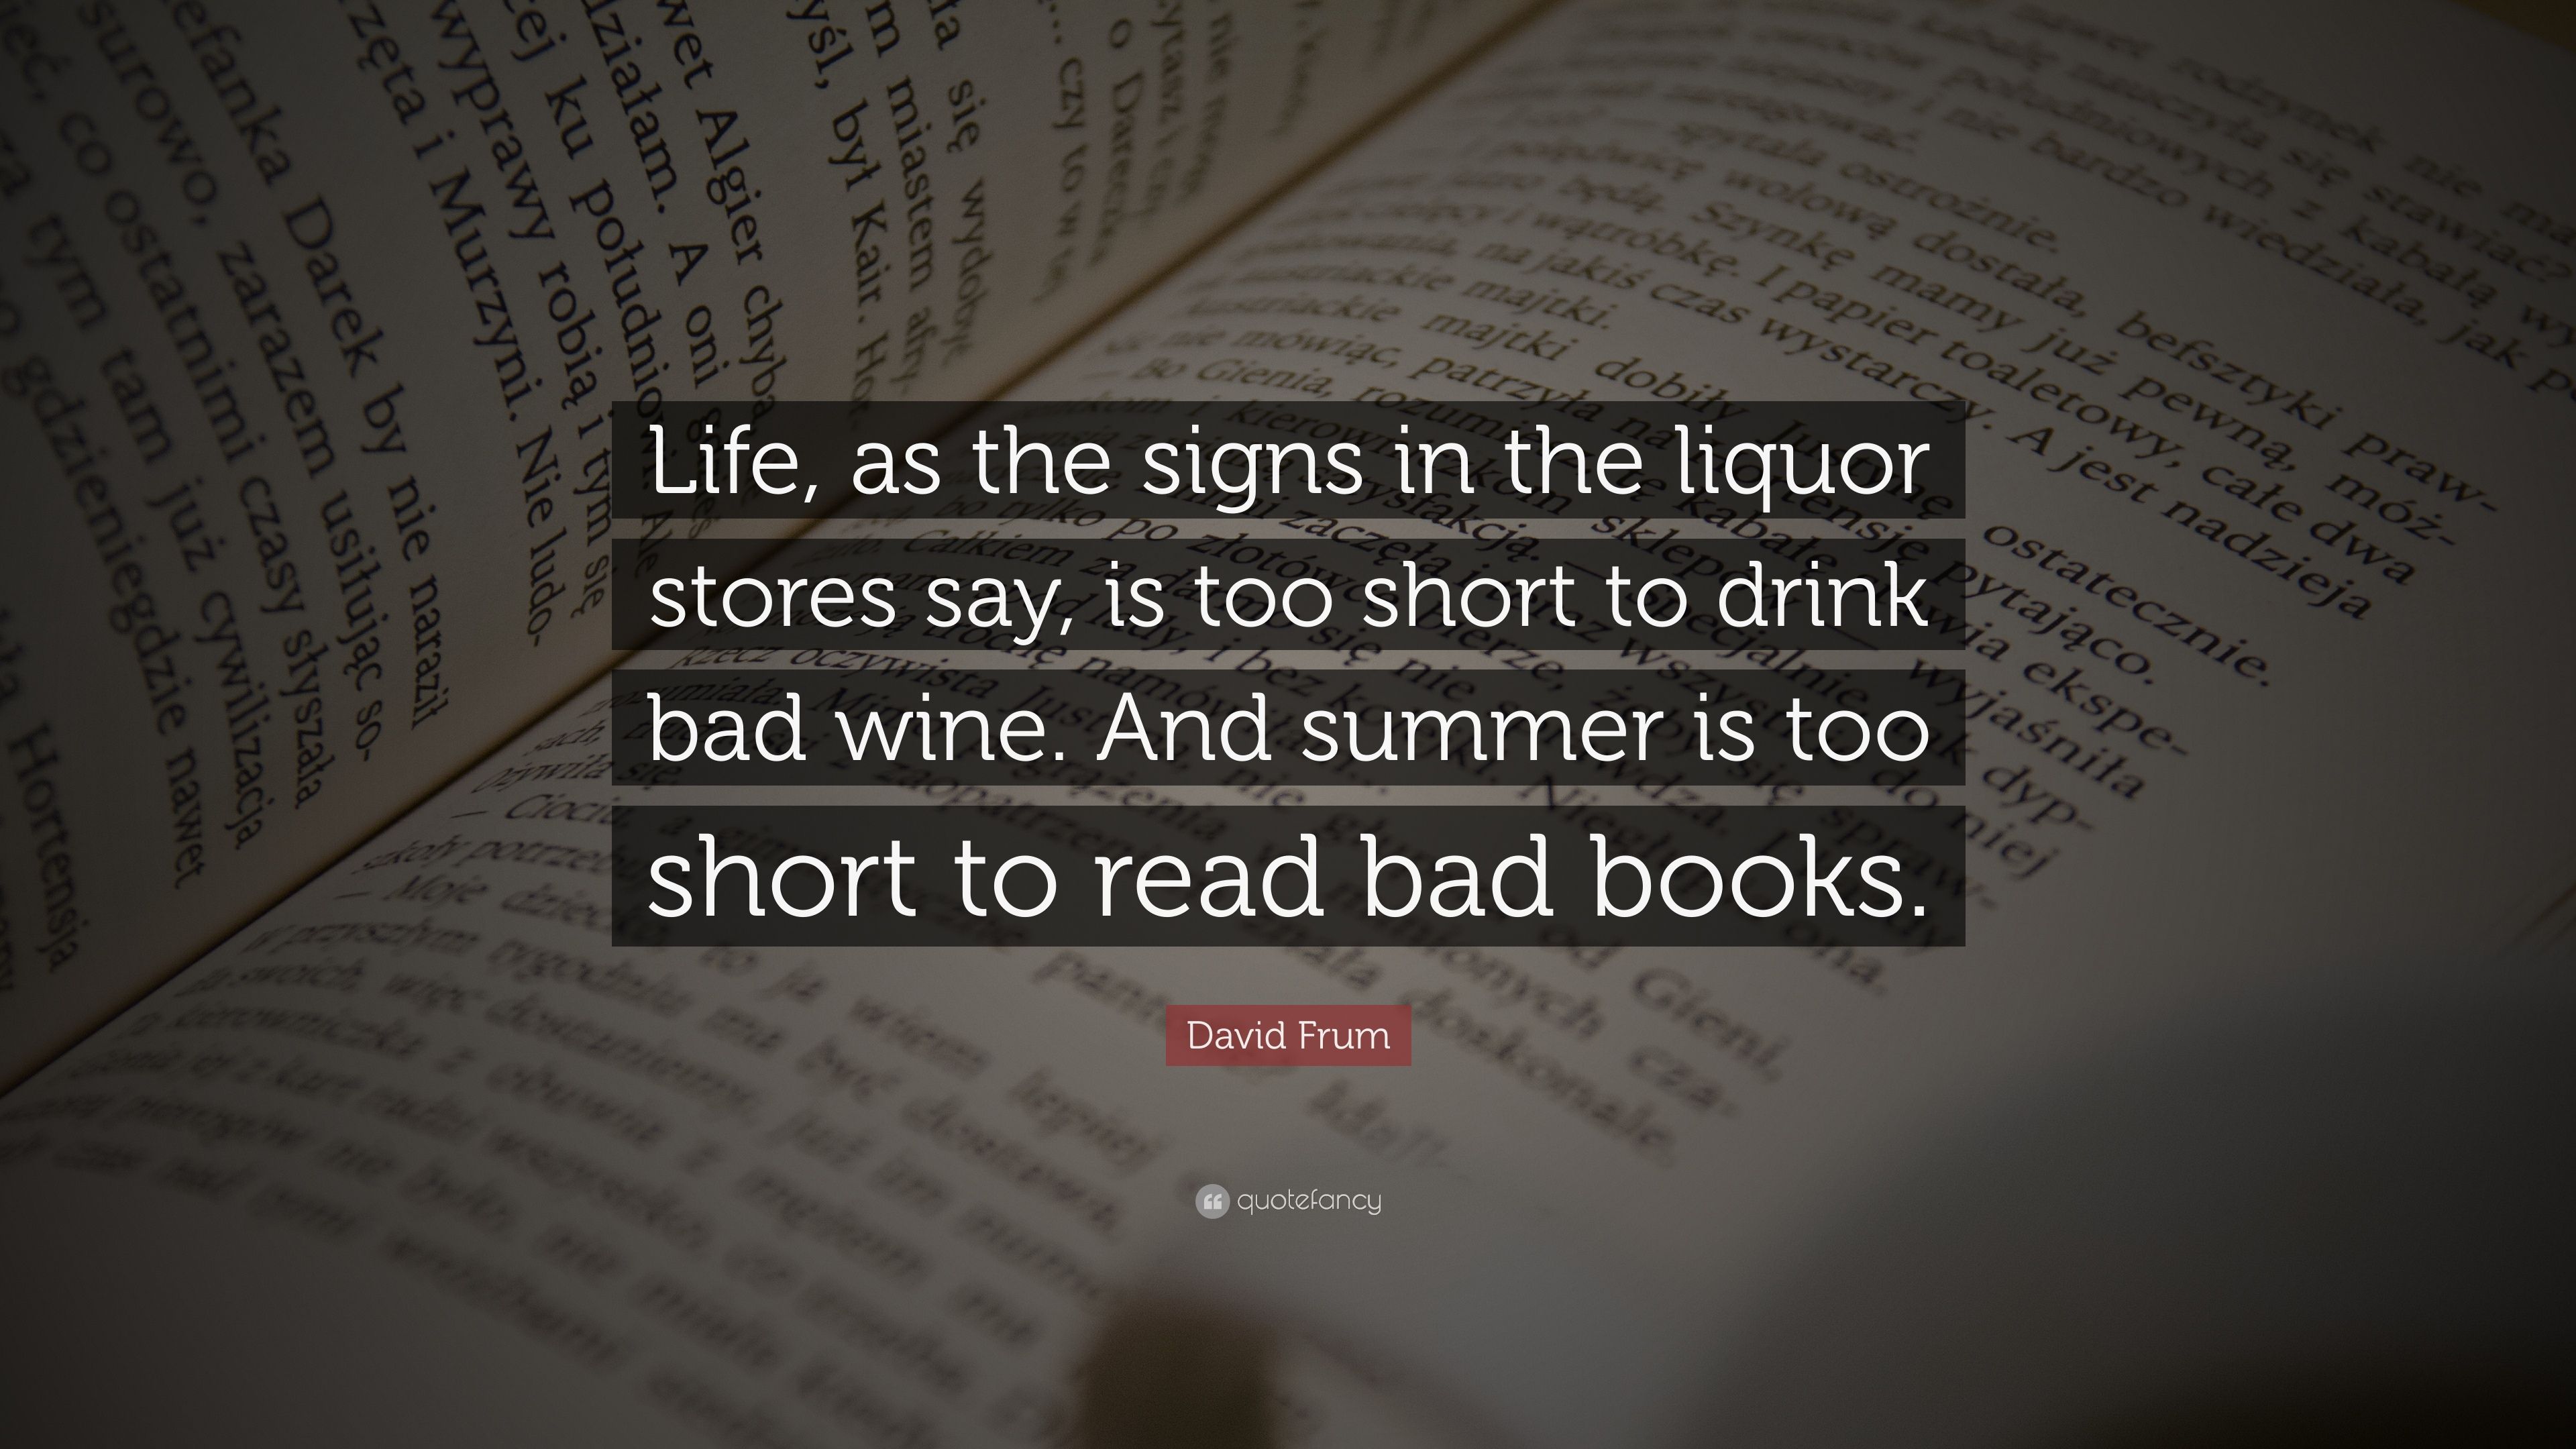 David Frum Quote: “Life, as the signs in the liquor stores say, is